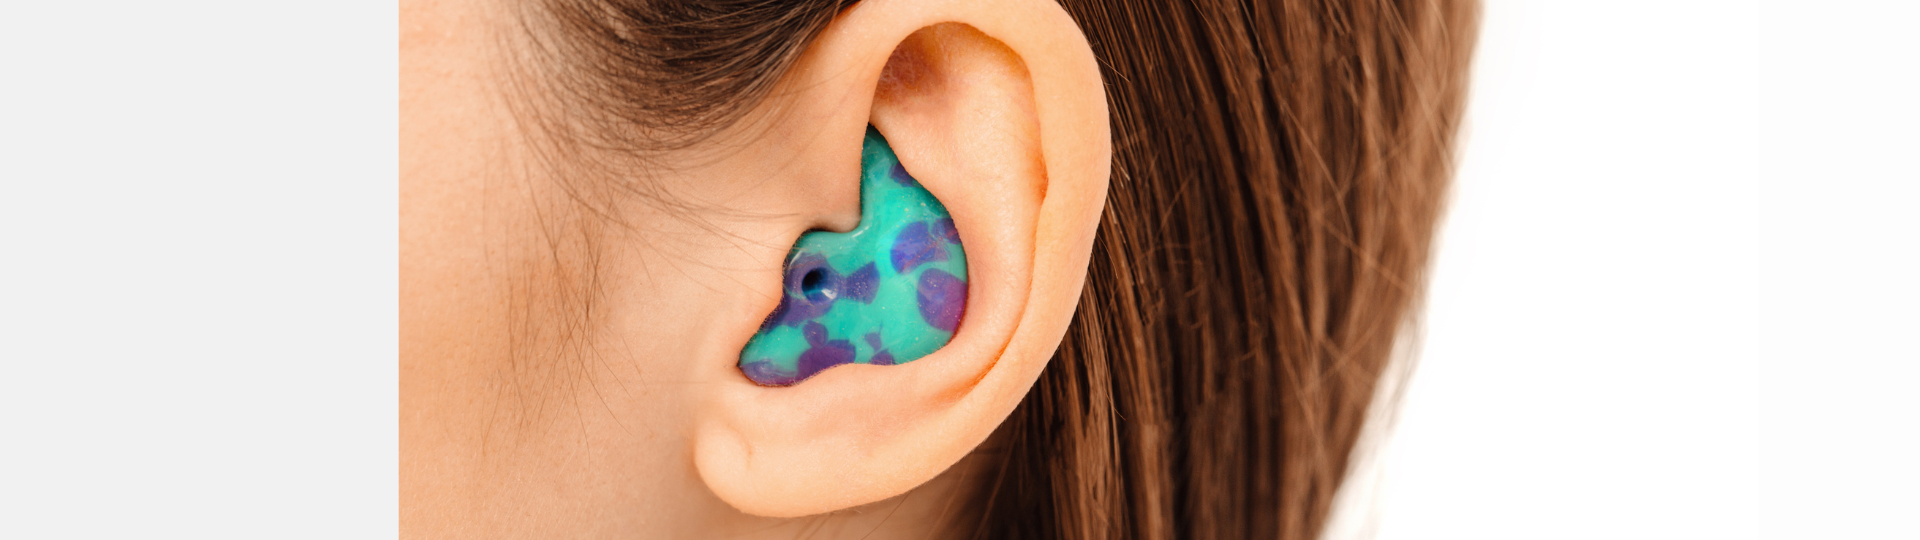 person with a brightly colored ear plug in their ear